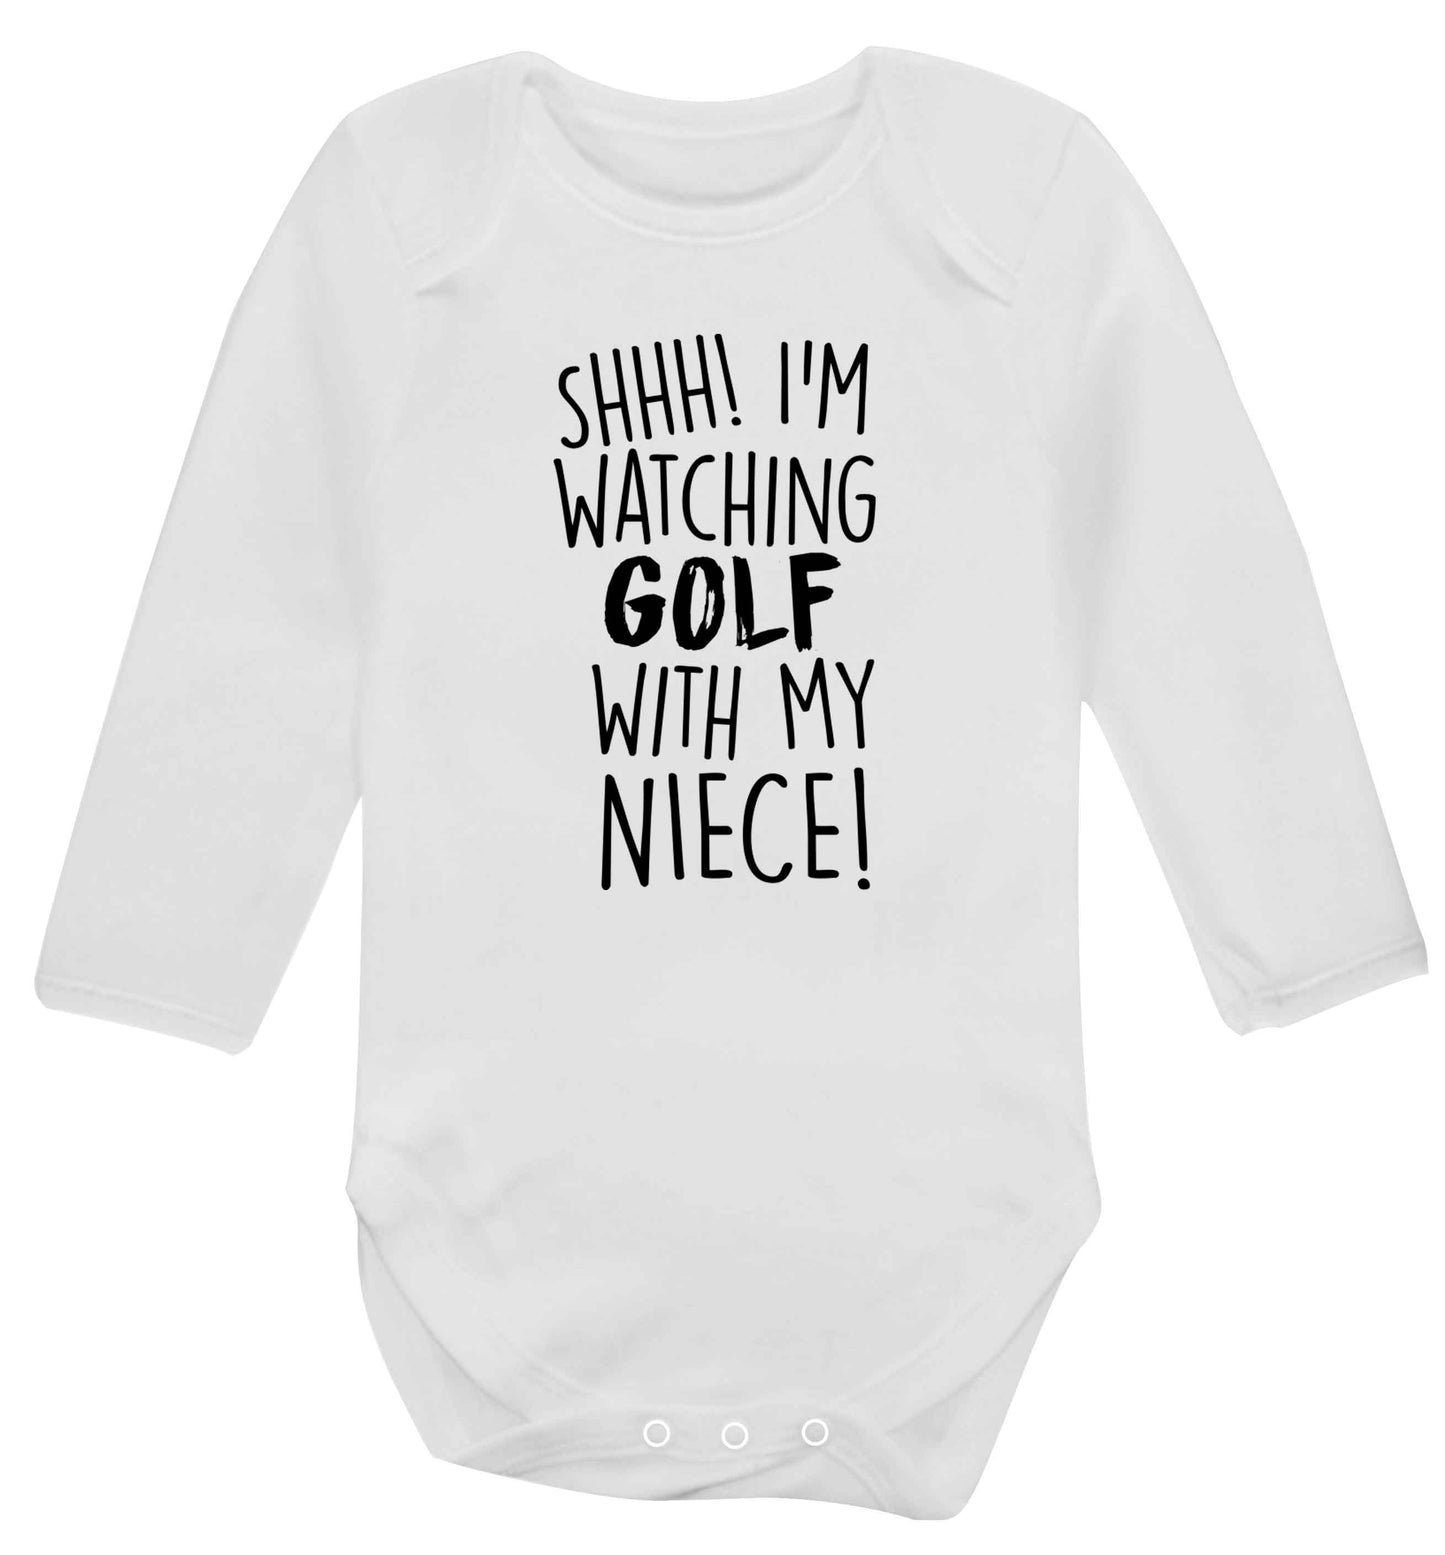 Shh I'm watching golf with my niece Baby Vest long sleeved white 6-12 months